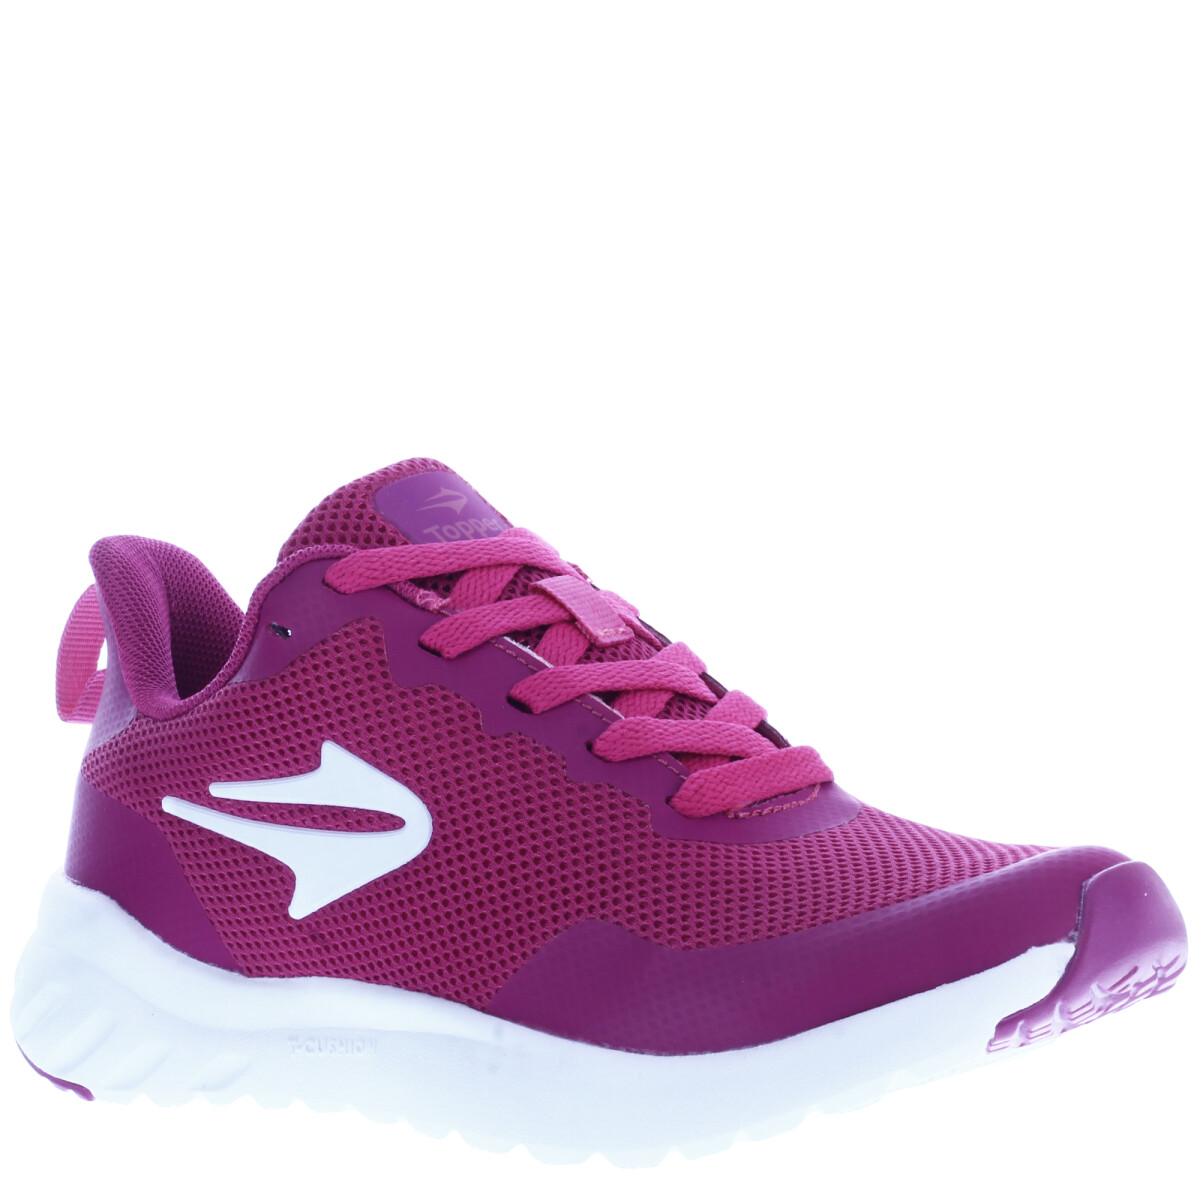 Strong Pace III Wns Topper - Fucsia/Blanco 